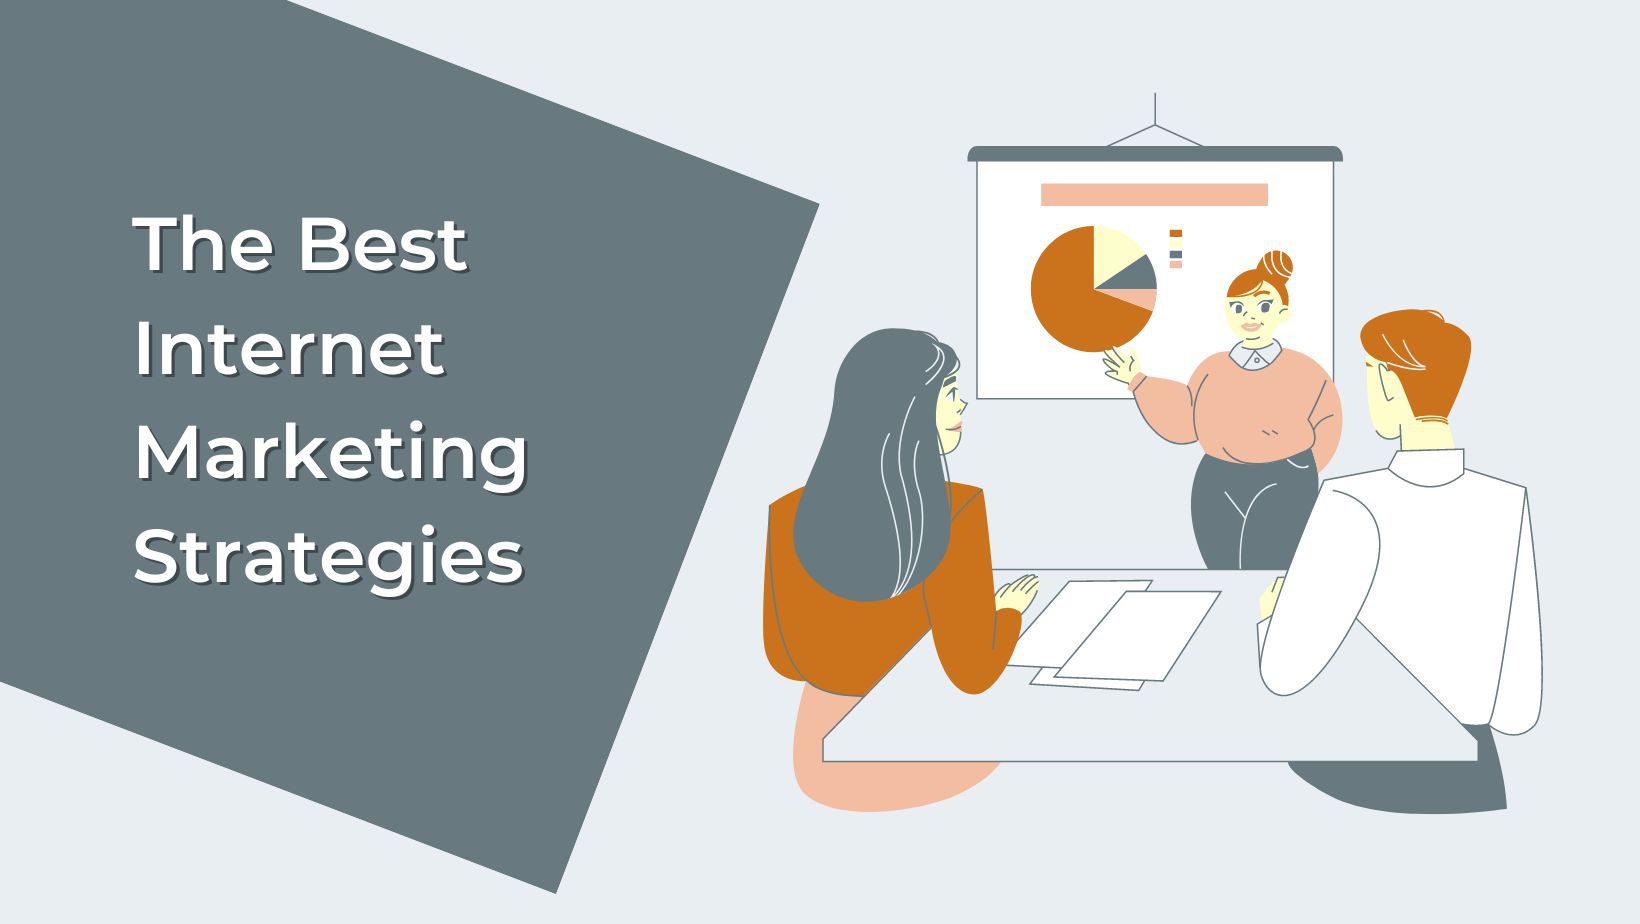 business employees planning to implement the best internet marketing strategies to their business